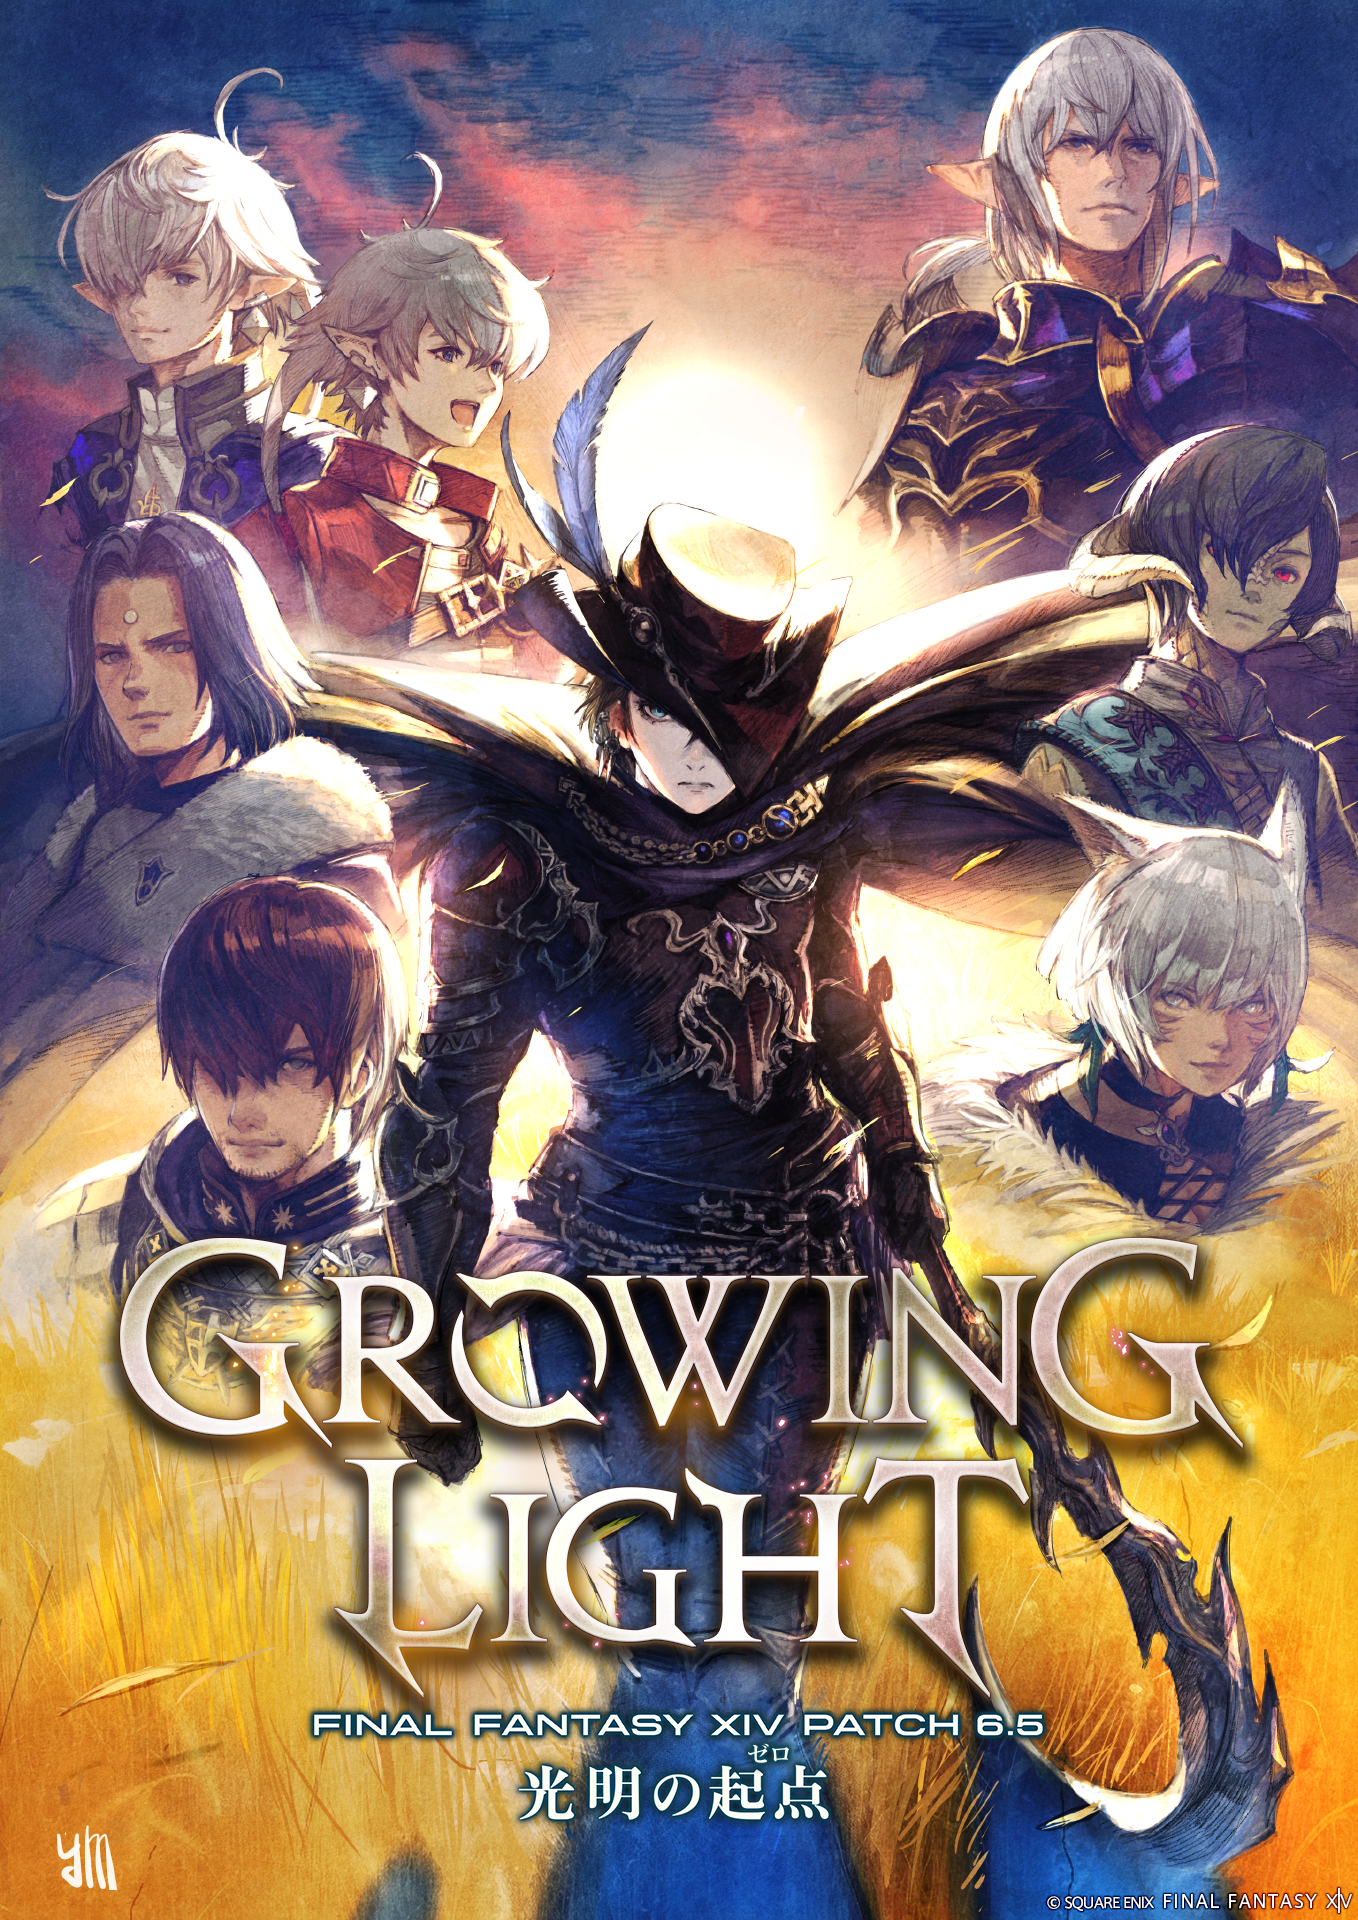 Final Fantasy XIV Online Patch 6.5: "Growing Light" Release Date Announced